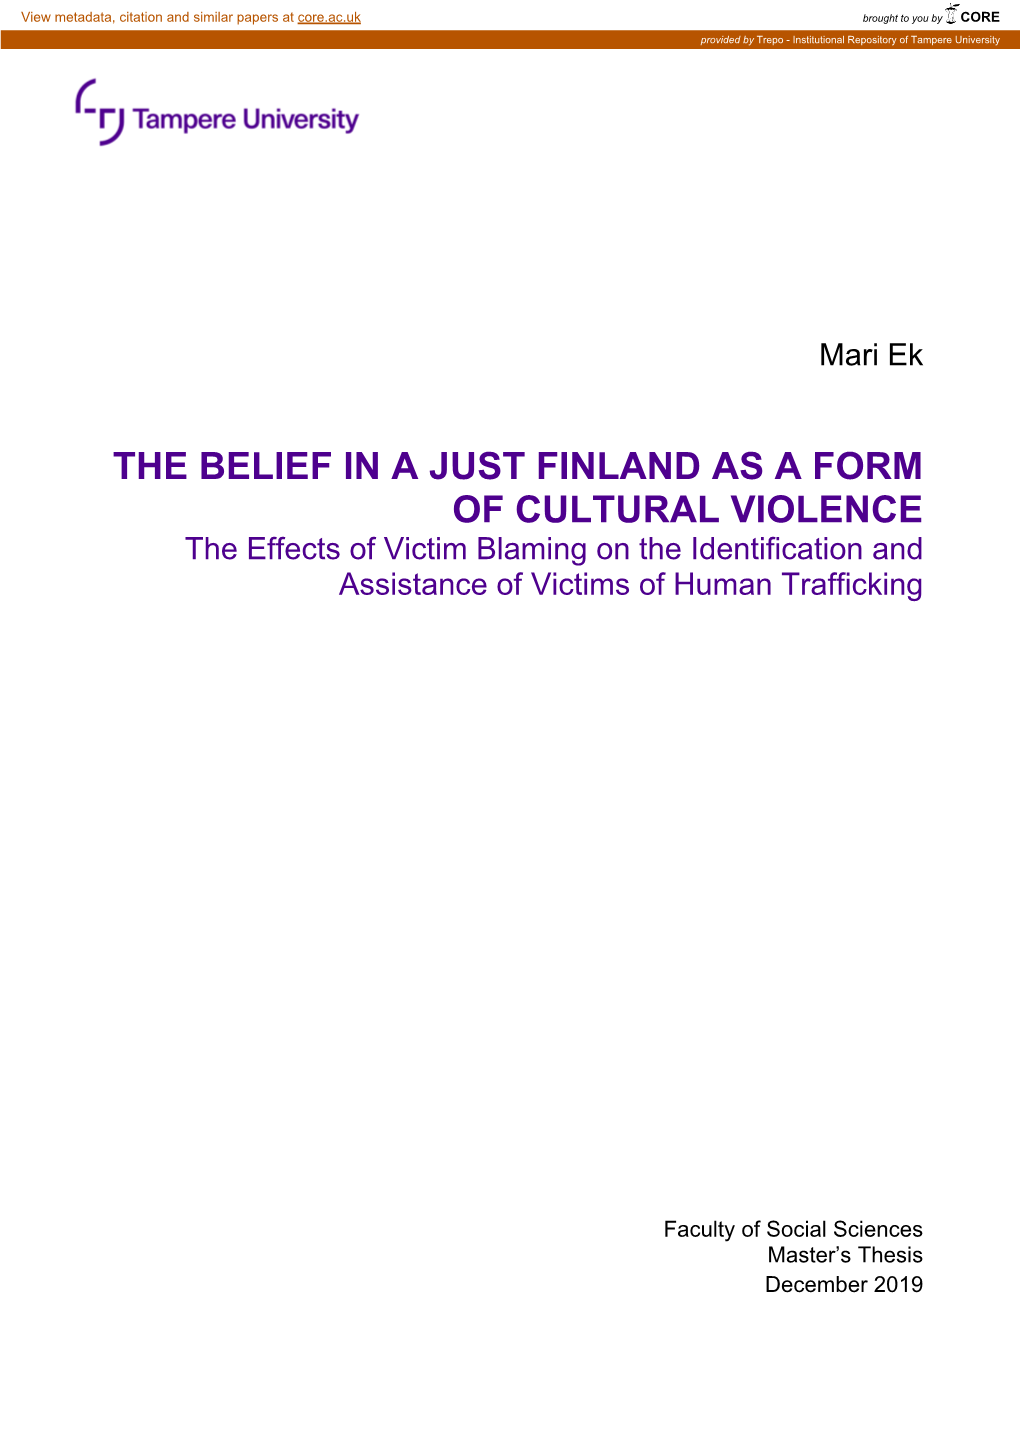 THE BELIEF in a JUST FINLAND AS a FORM of CULTURAL VIOLENCE the Effects of Victim Blaming on the Identification and Assistance of Victims of Human Trafficking